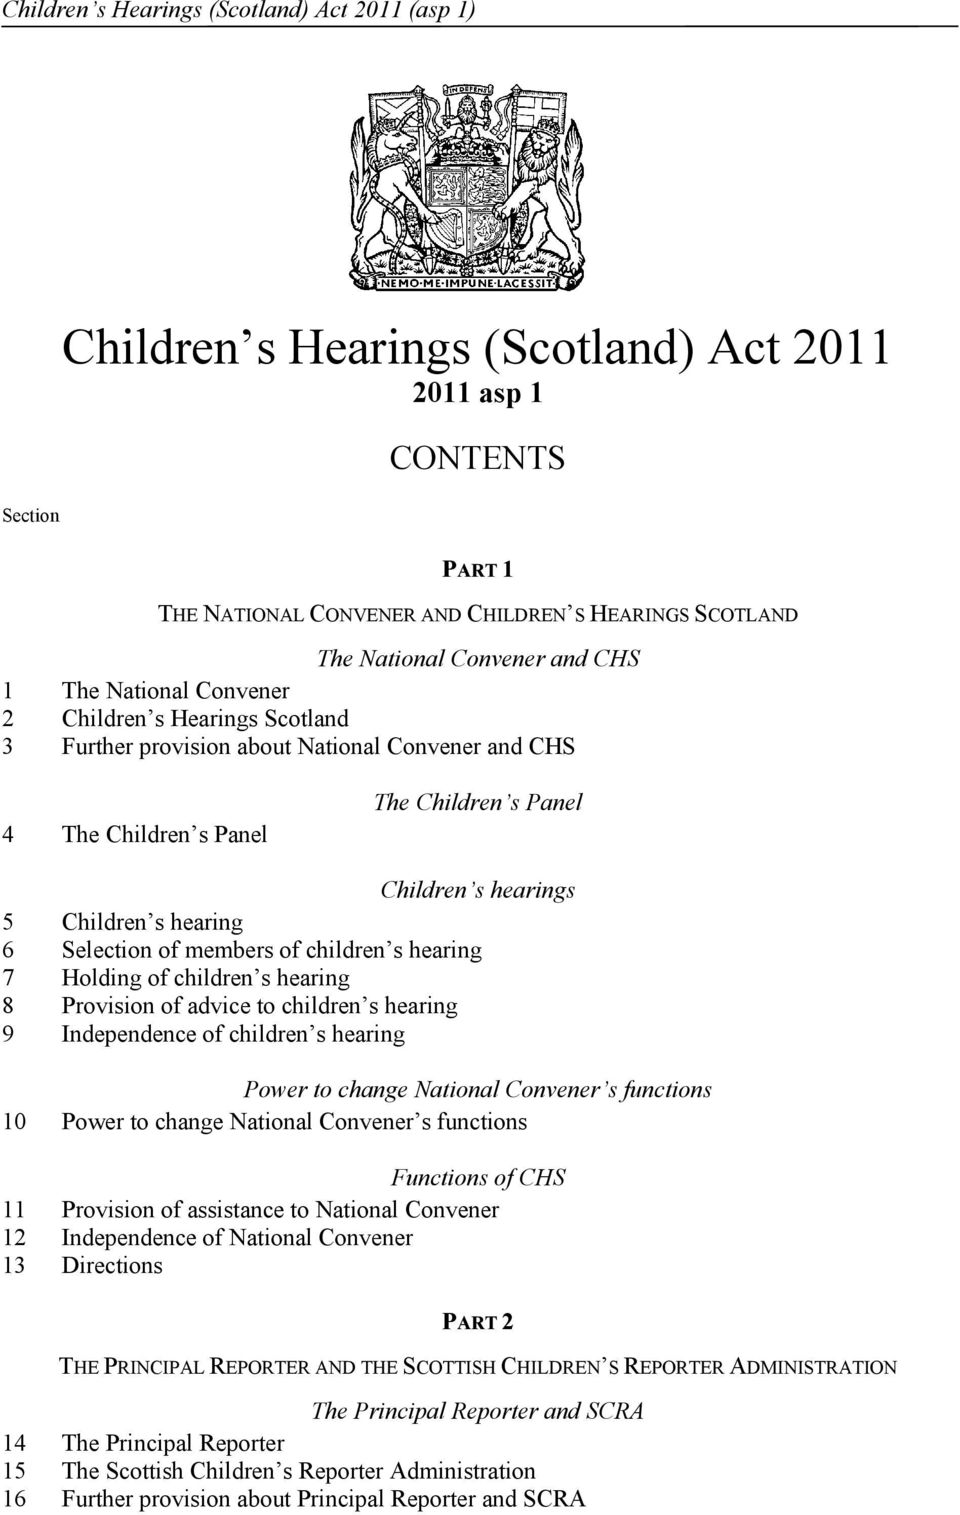 6 Selection of members of children s hearing 7 Holding of children s hearing 8 Provision of advice to children s hearing 9 Independence of children s hearing Power to change National Convener s